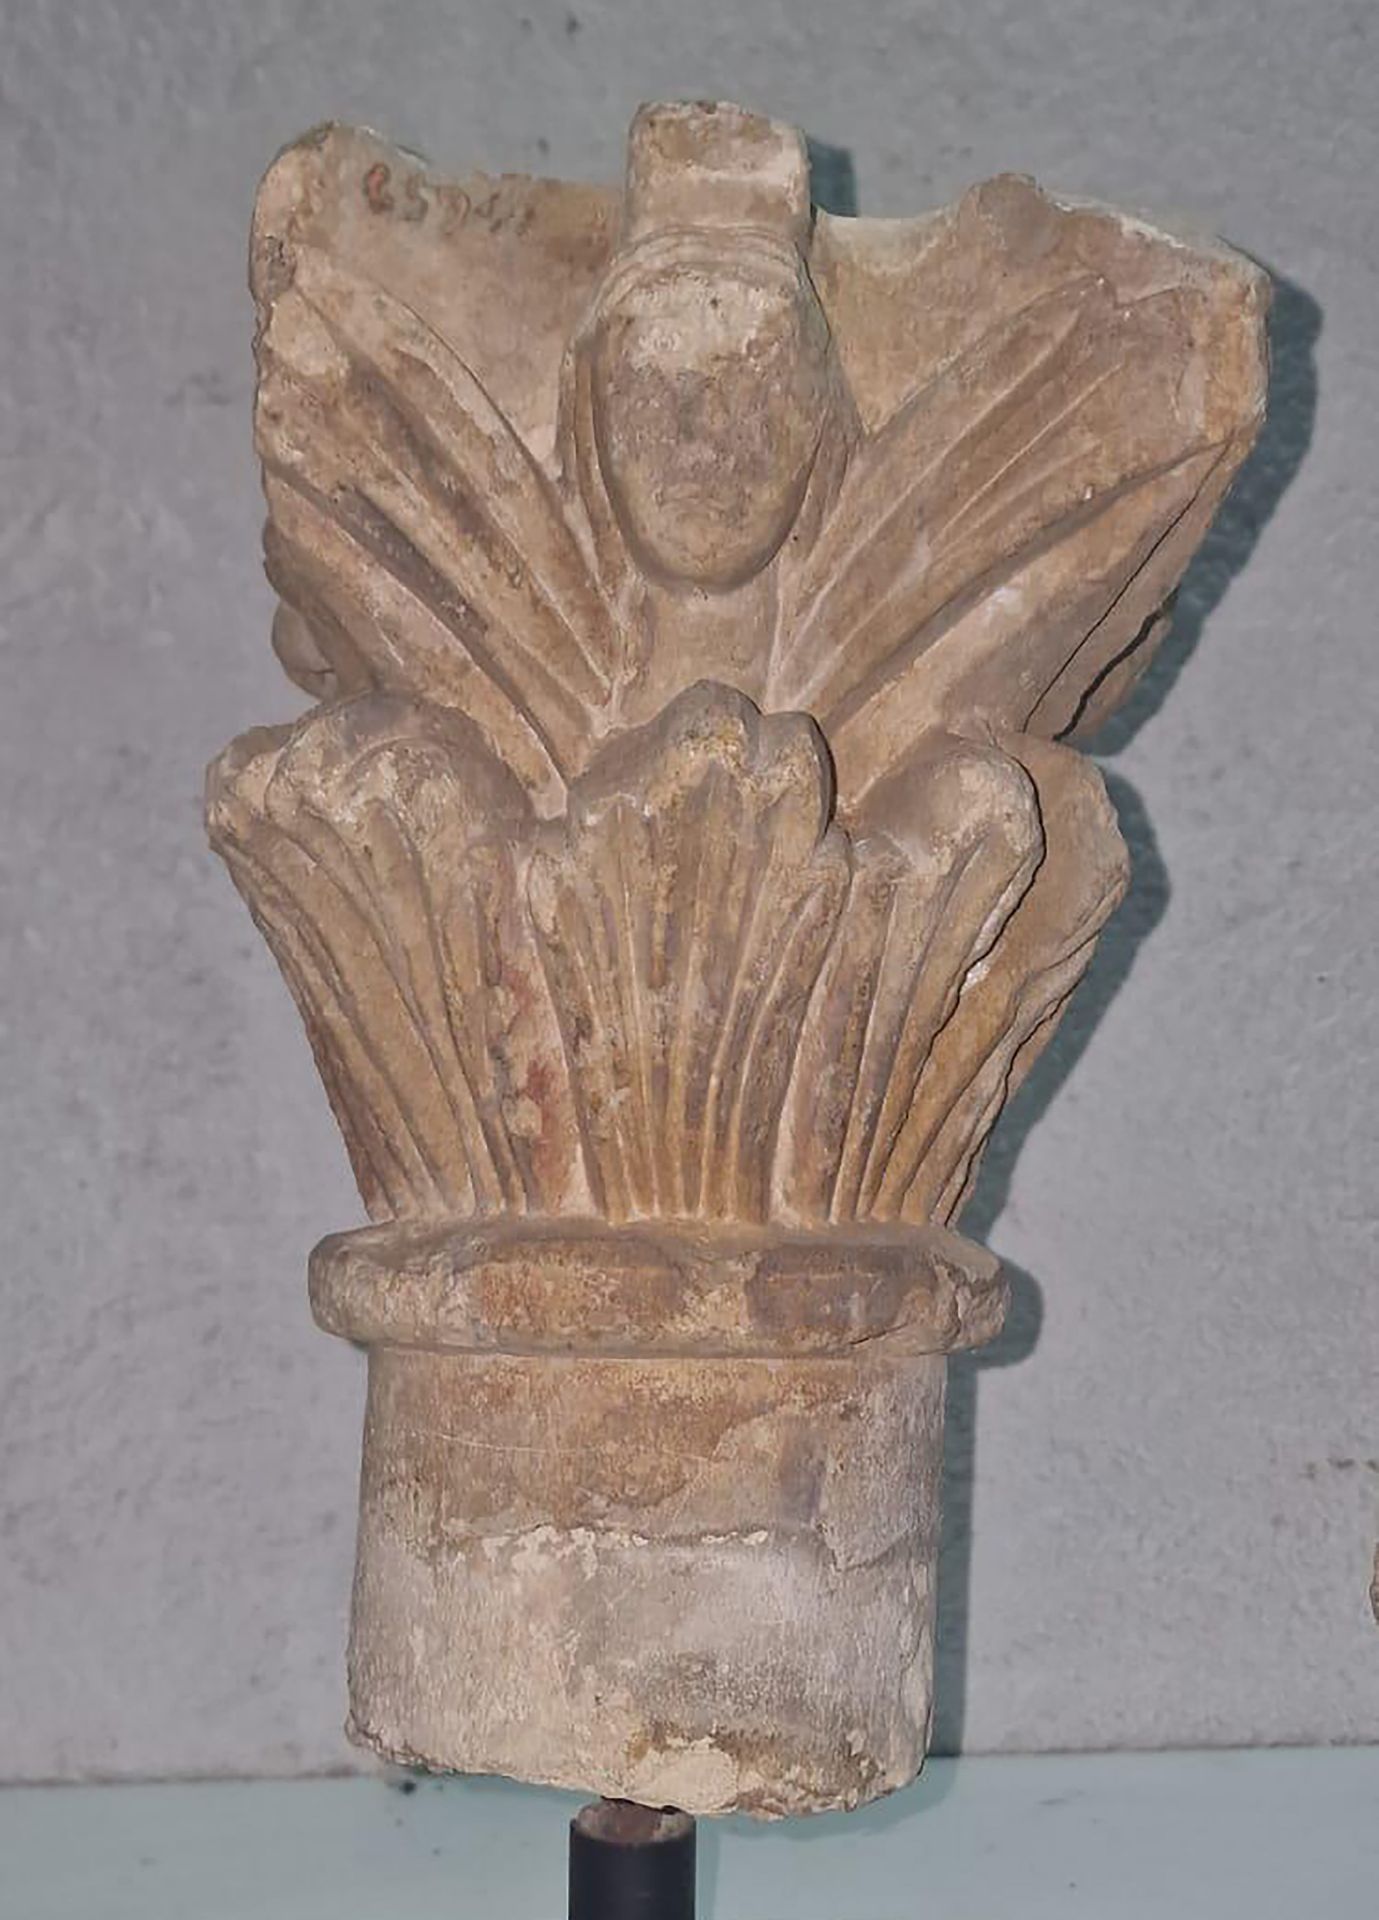 Late Capital - Catalan Romanesque in stone, 13th - 14th centuries - Image 4 of 4